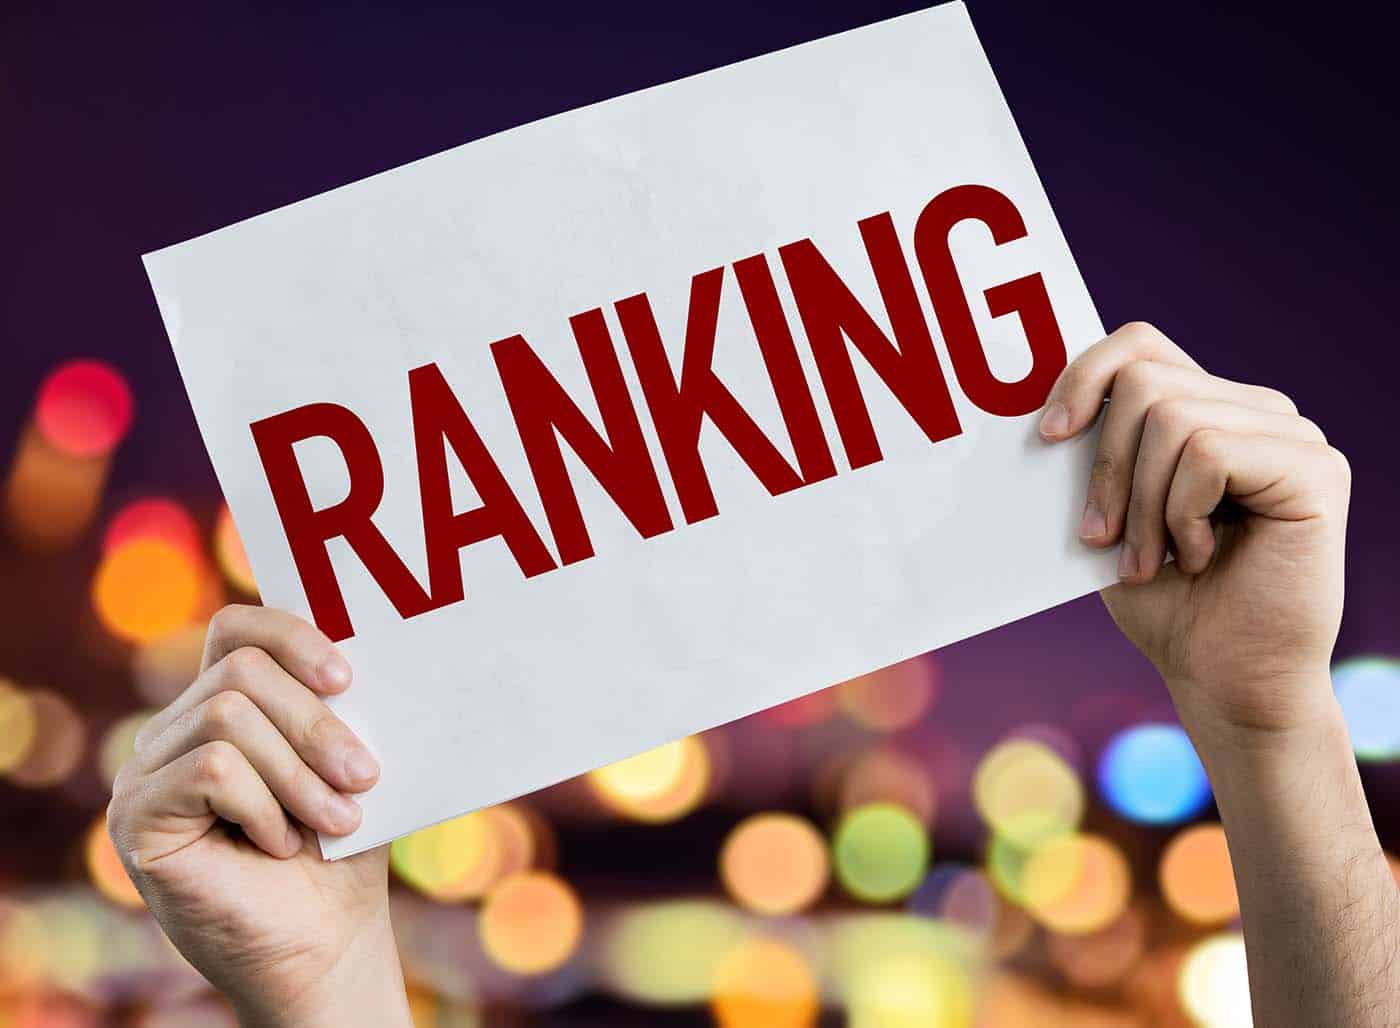 Ranking on Google without links